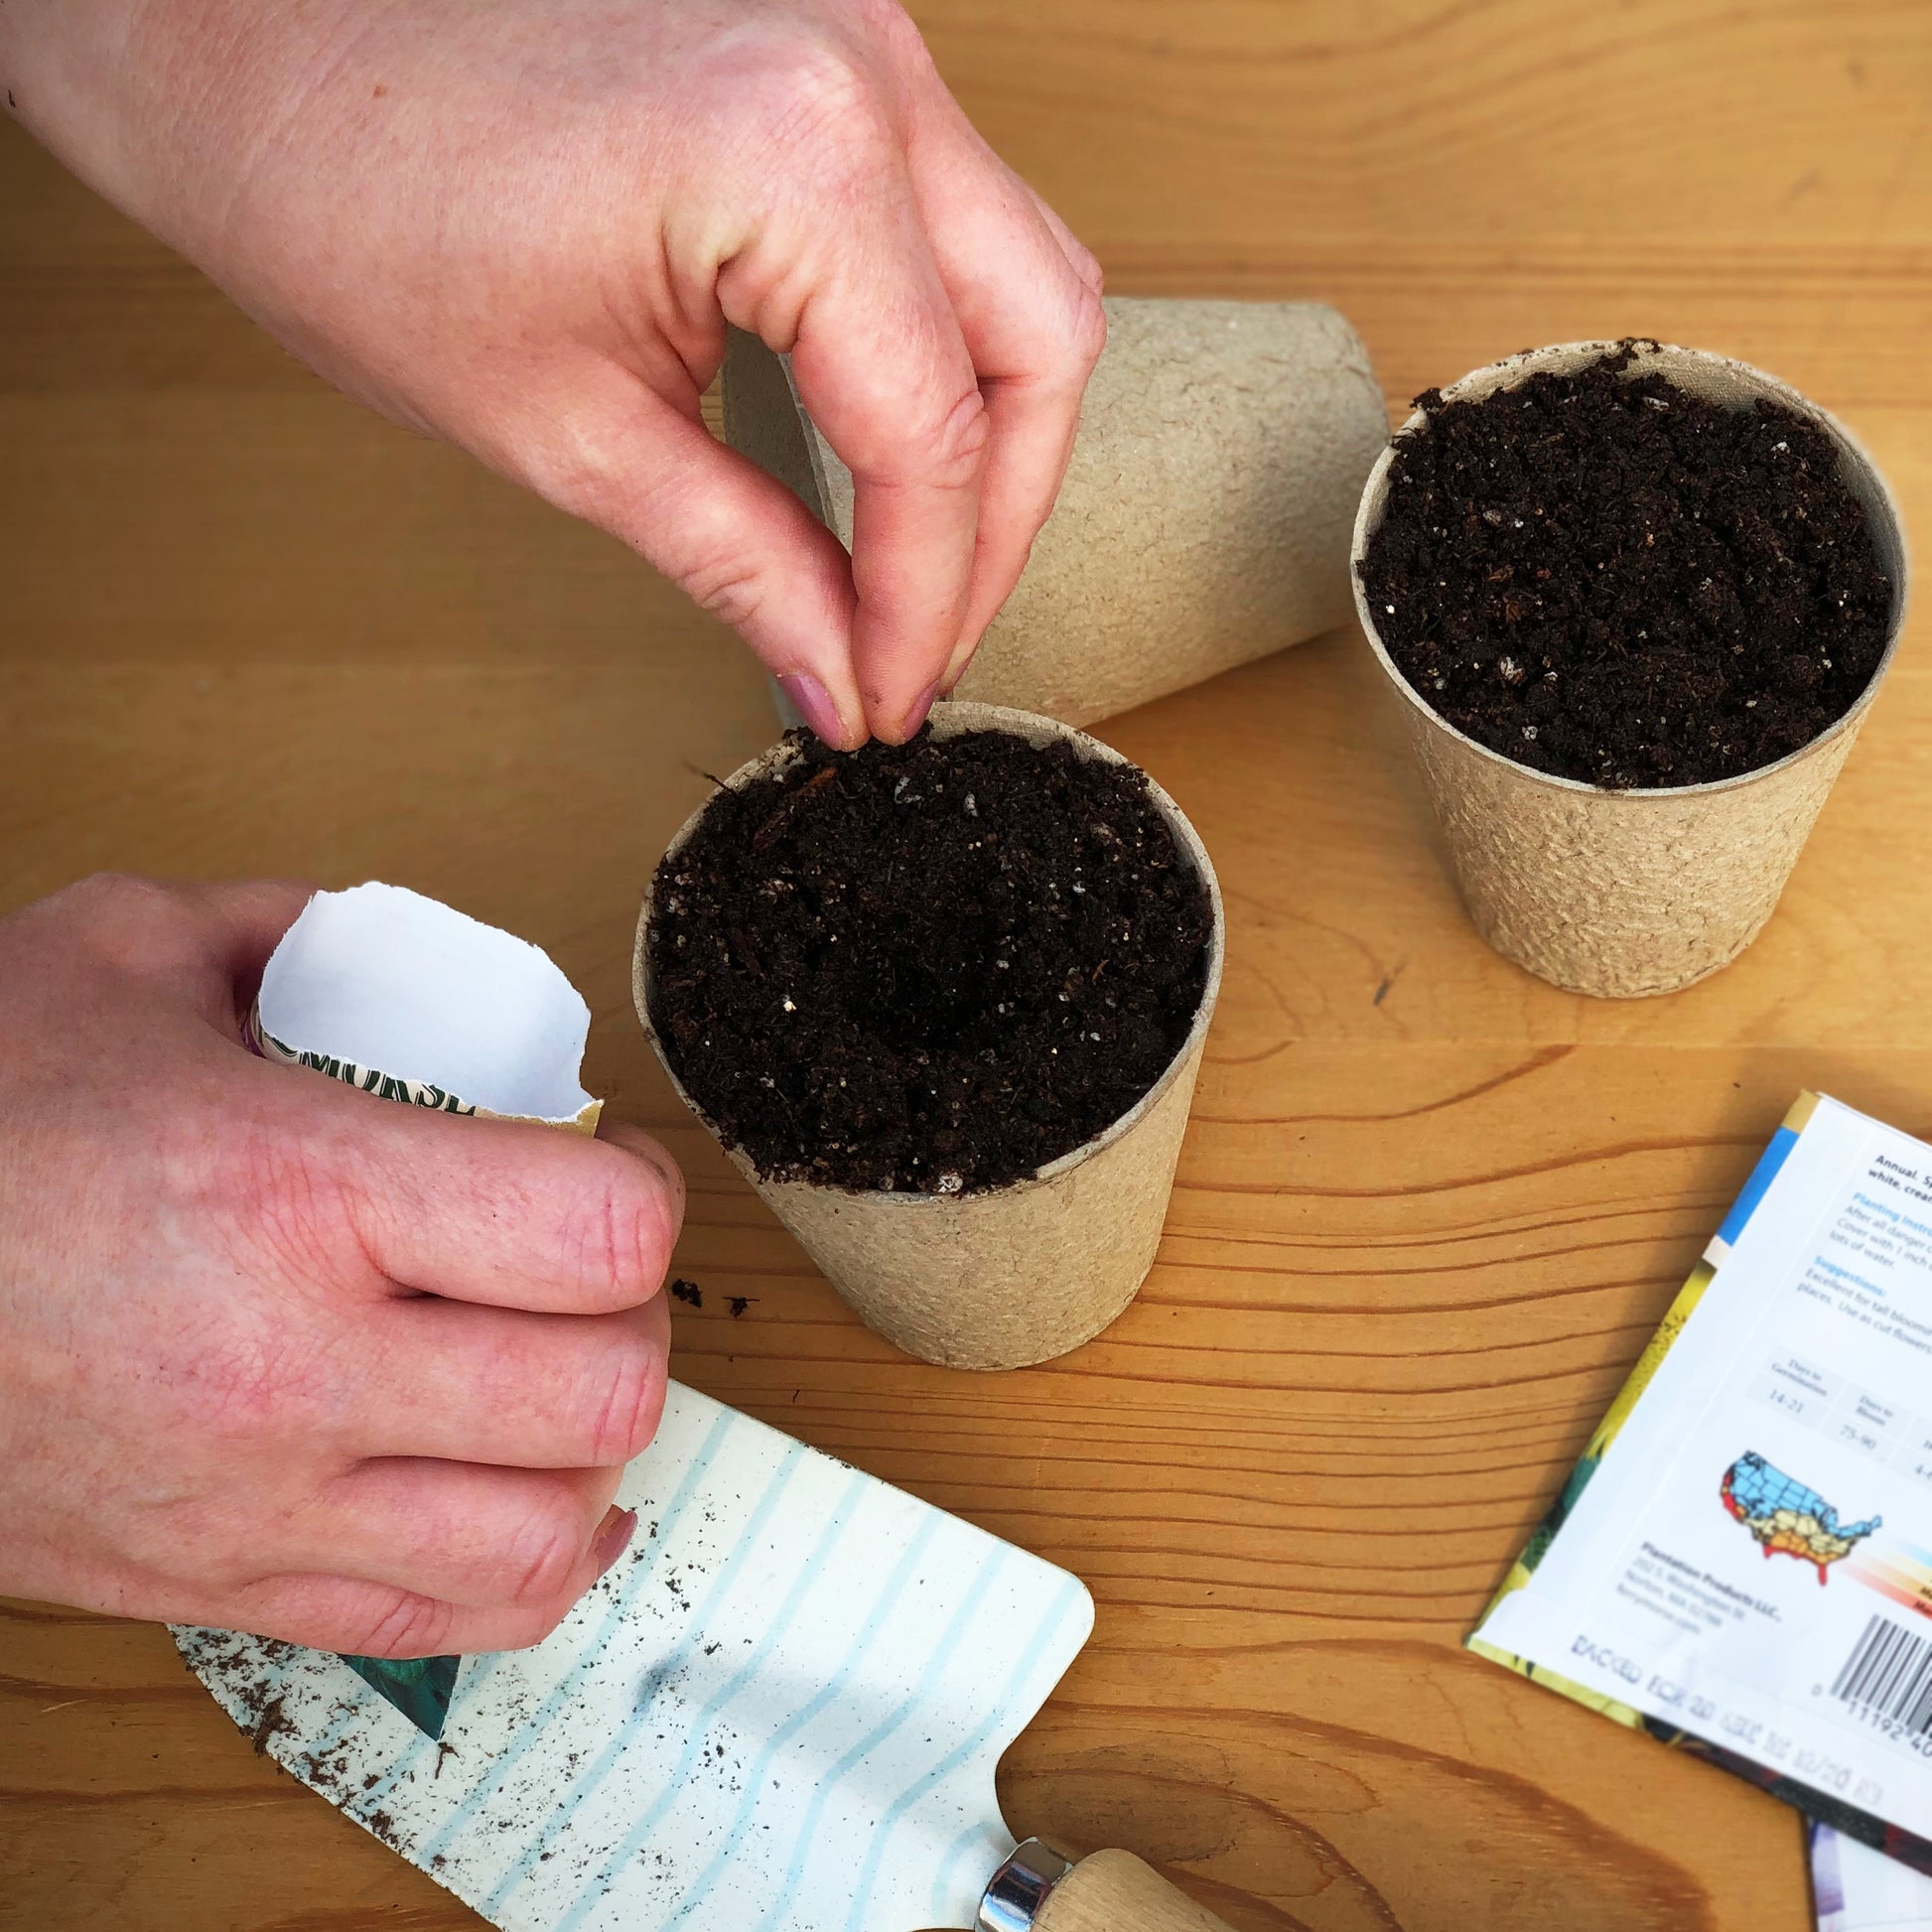 Start Black Beauty Squash seeds in Jiffy peat pots filled with sowing mix.